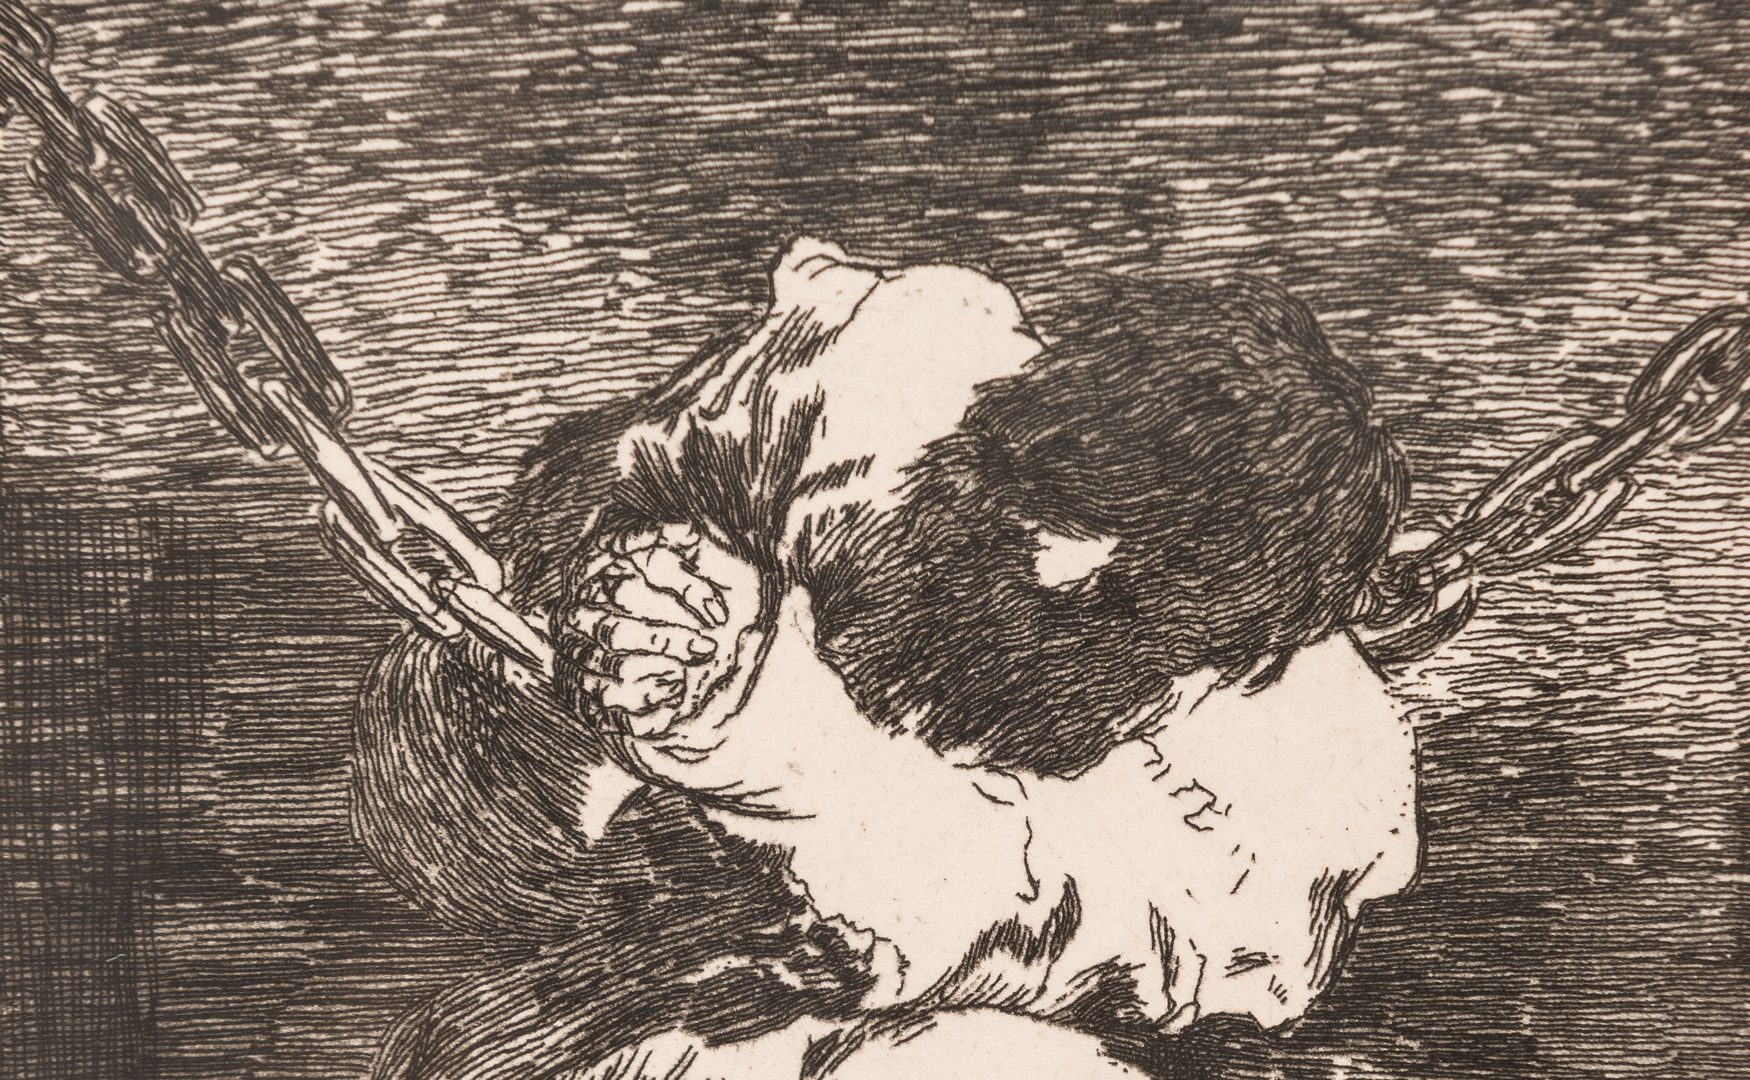 Lot 593: 2 Posthumous Etchings, Goya and Cezanne